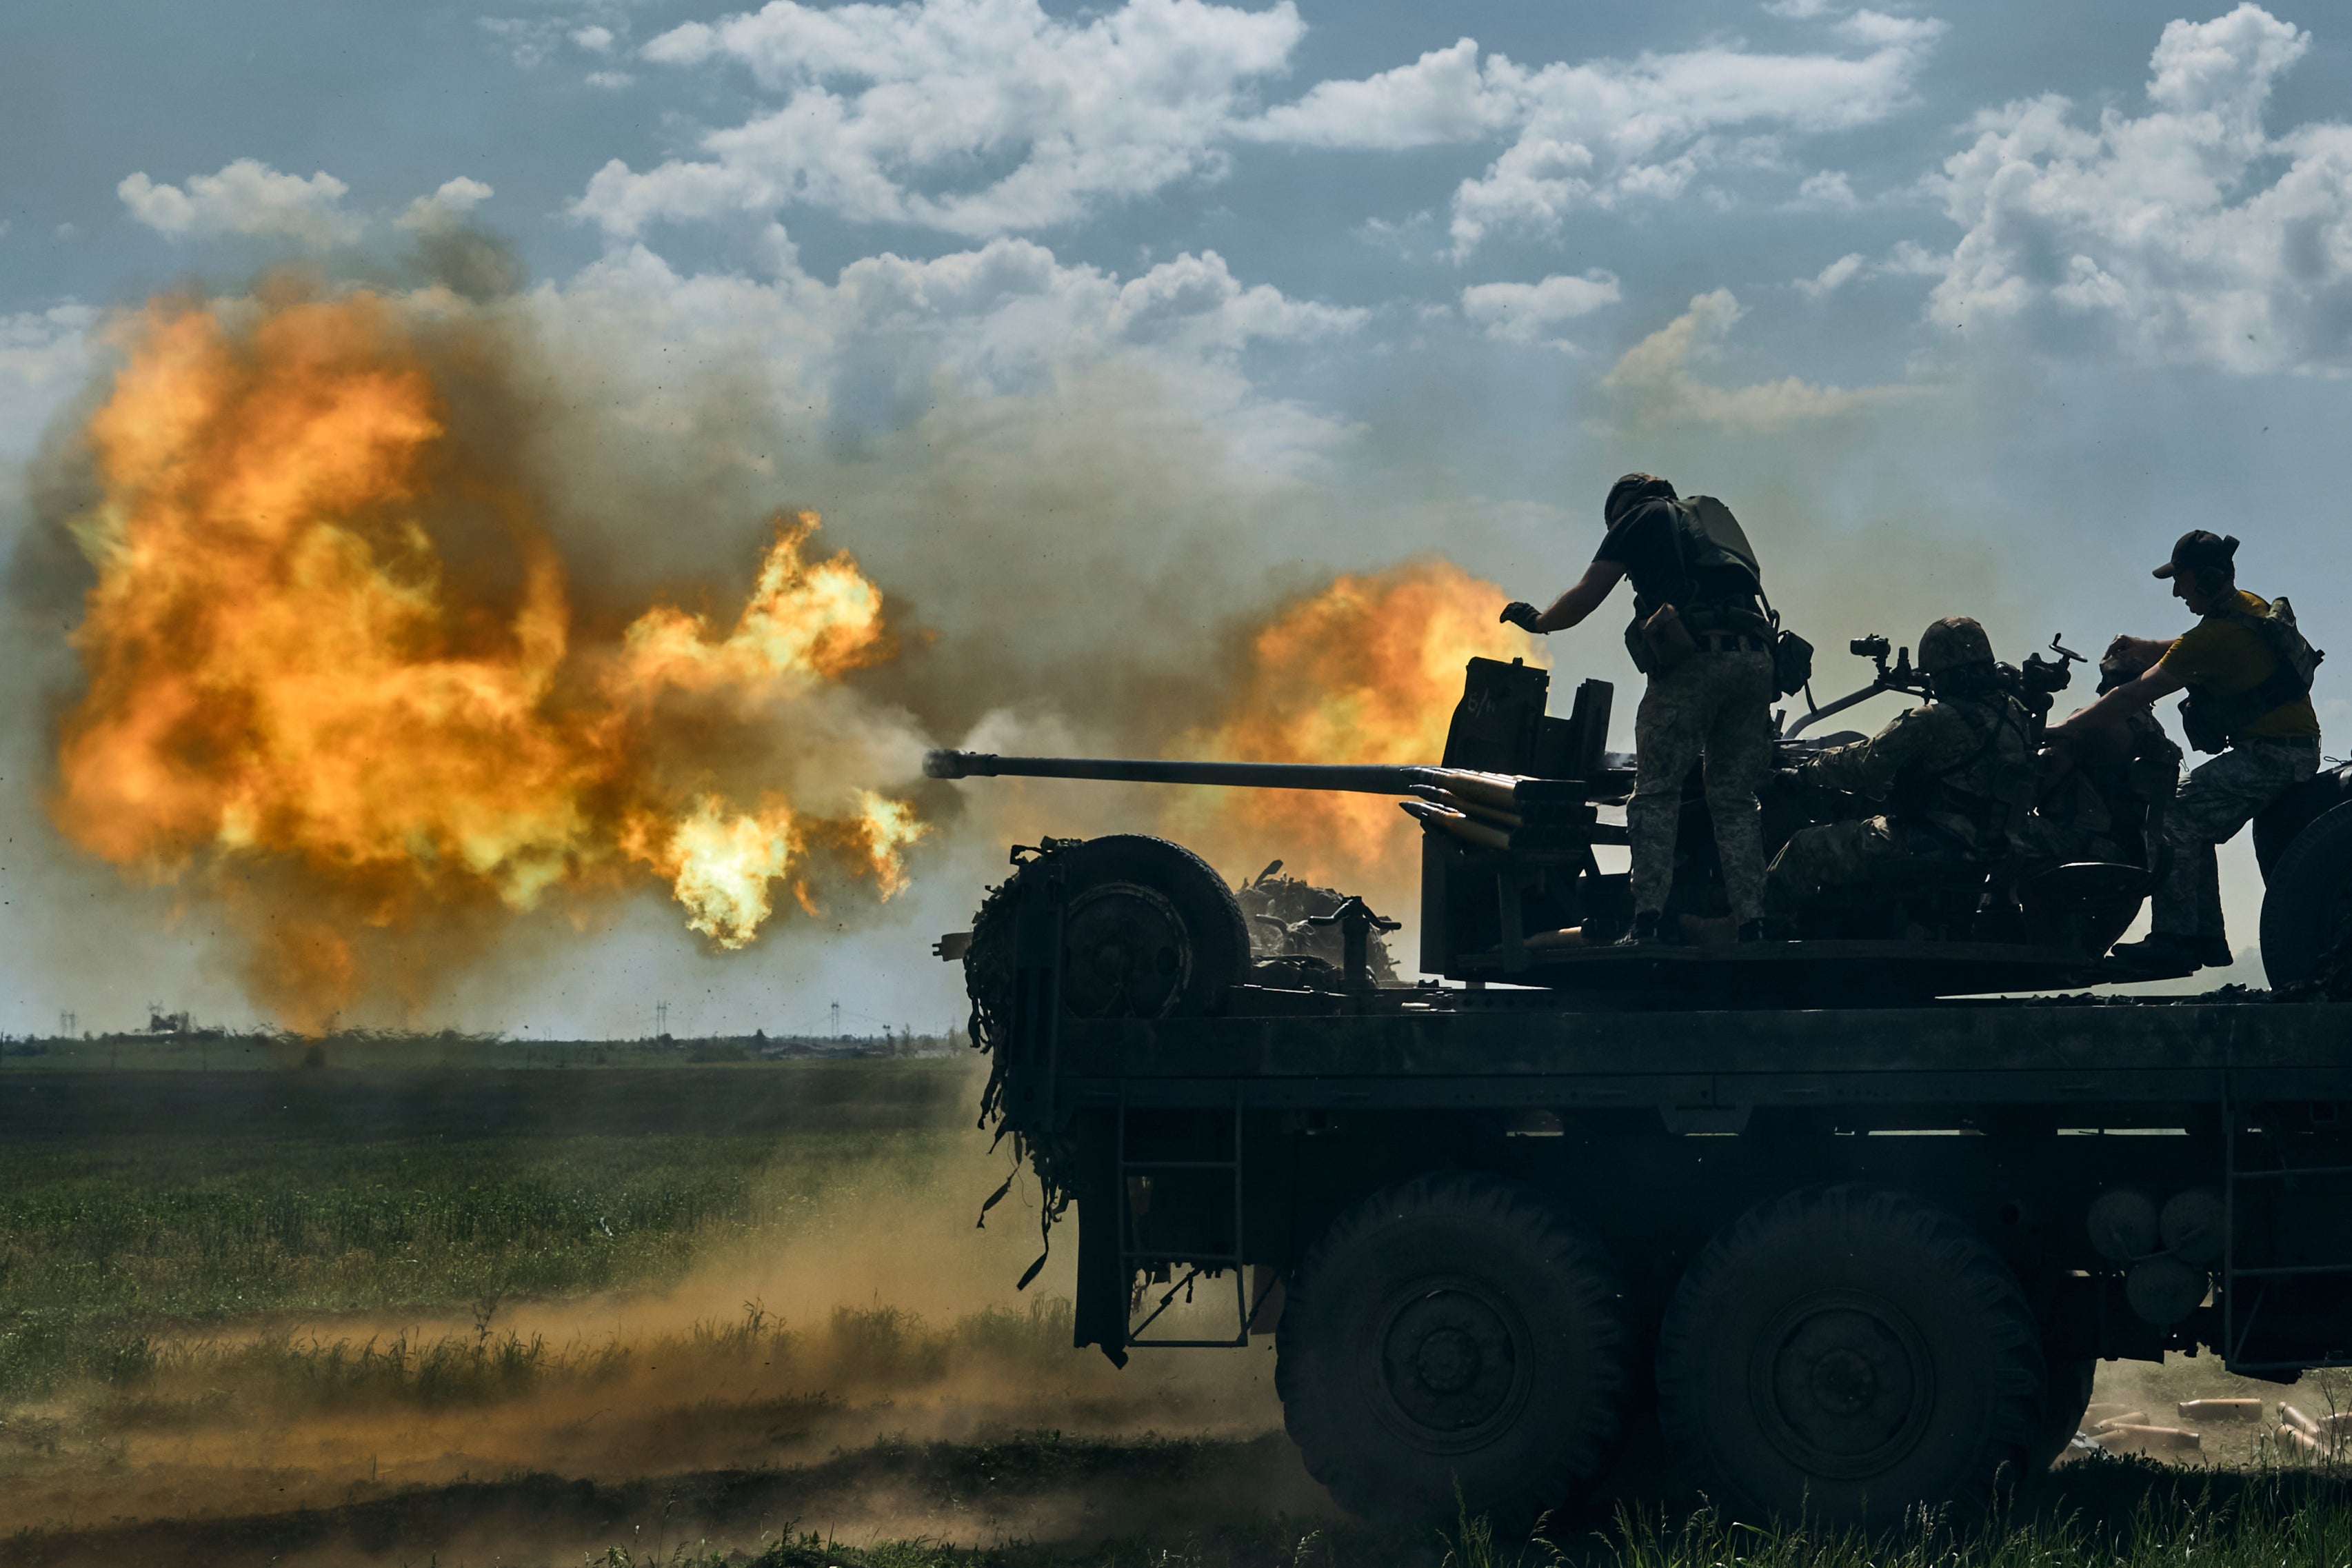 There has been fierce fighting around the front lines in Donetsk and Zaporizhzhia for months